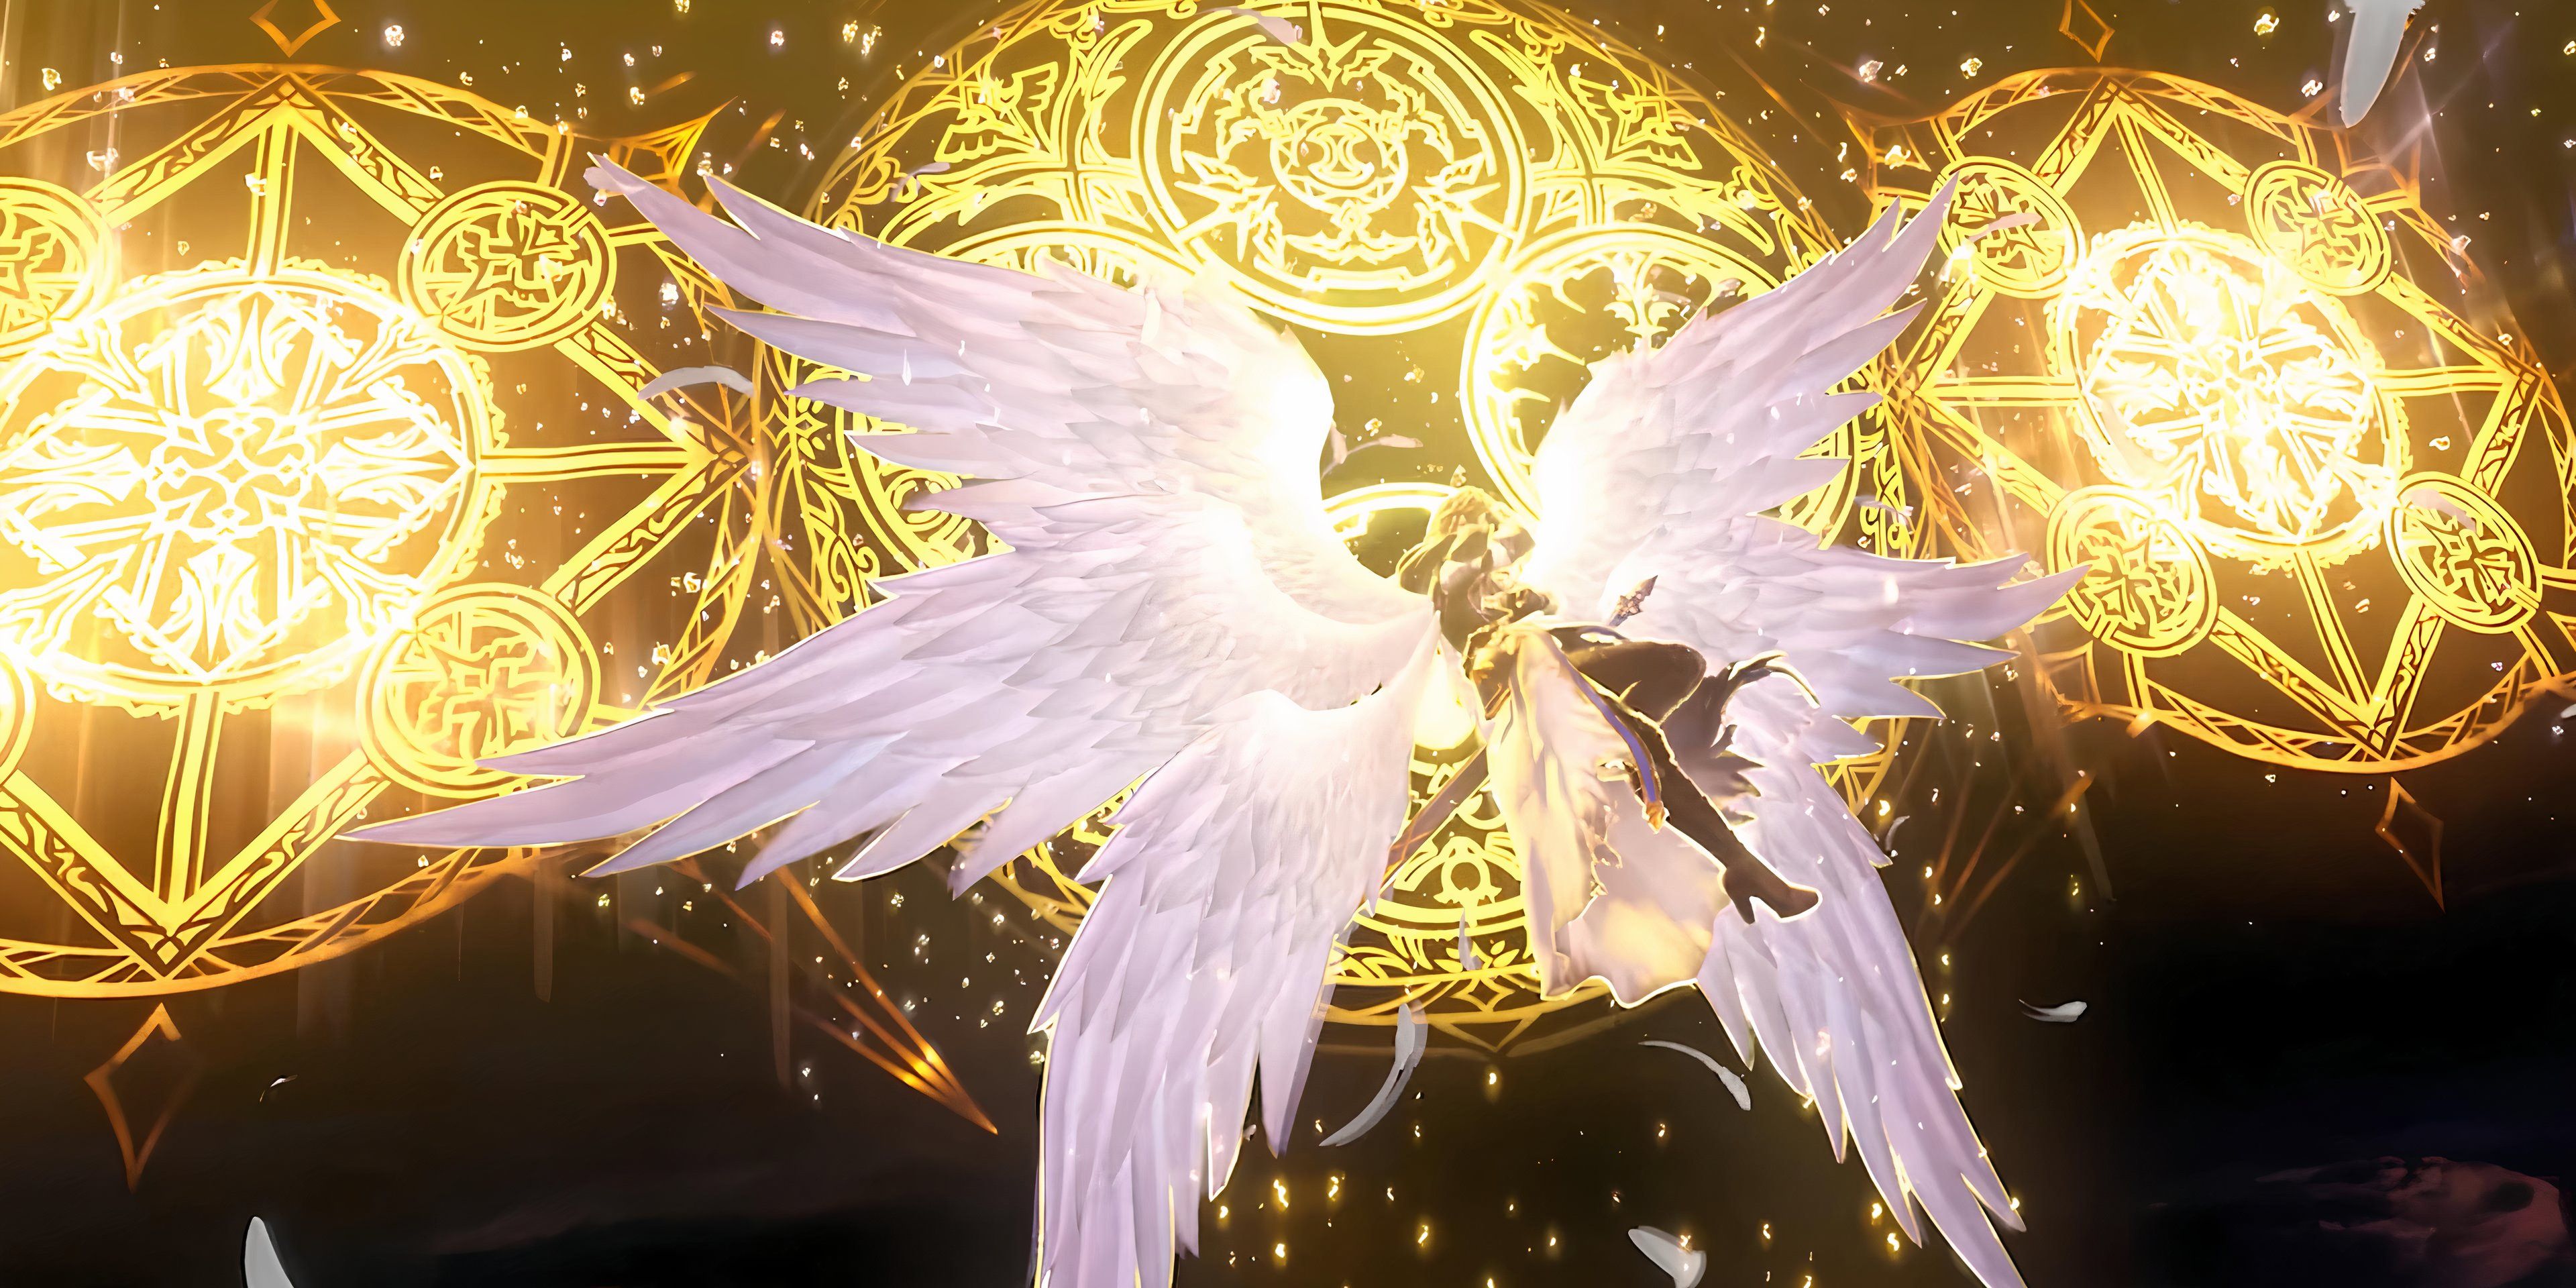 Sandalphon unleashes an attack in Granblue Fantasy Relink